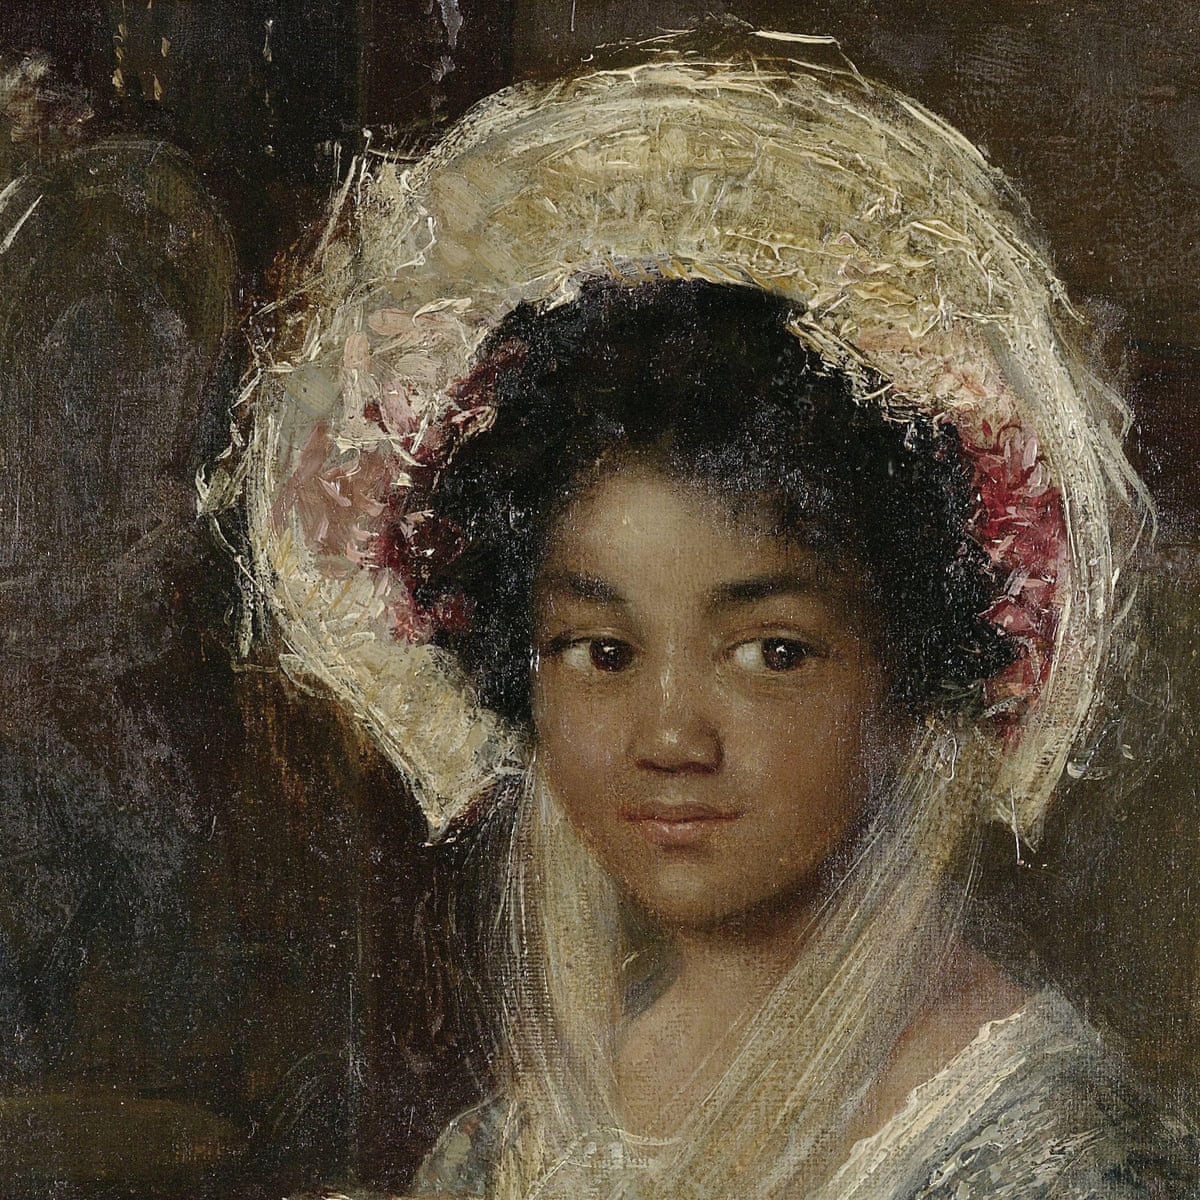 Nigro Ka School Sexy Videos - Young Negro Girl: should artworks with offensive names get an update? | Art  and design | The Guardian